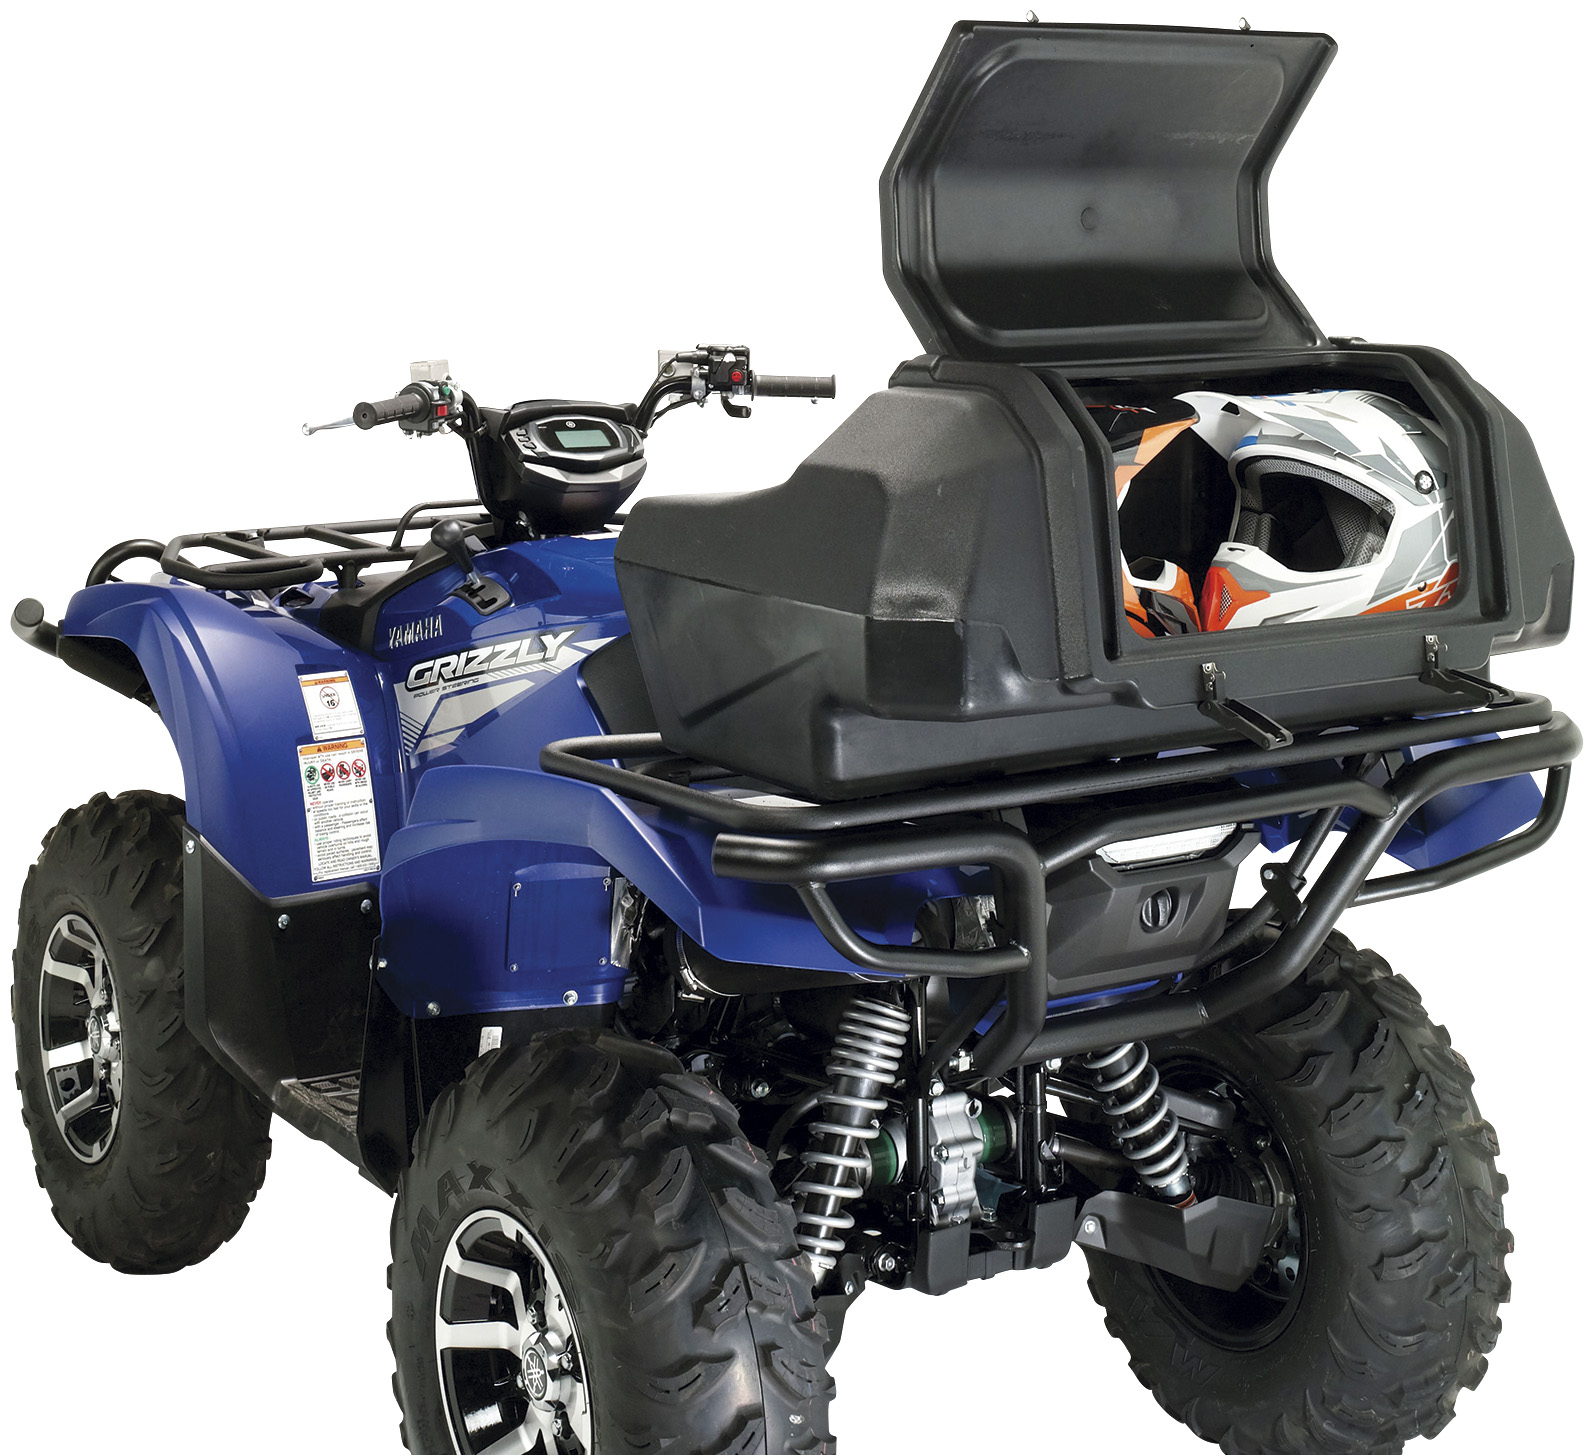 The Moose Utility Division Helmet Storage Trunk is ideal for anyone who needs to store their helmets when they stop to take a break from riding their ATV.